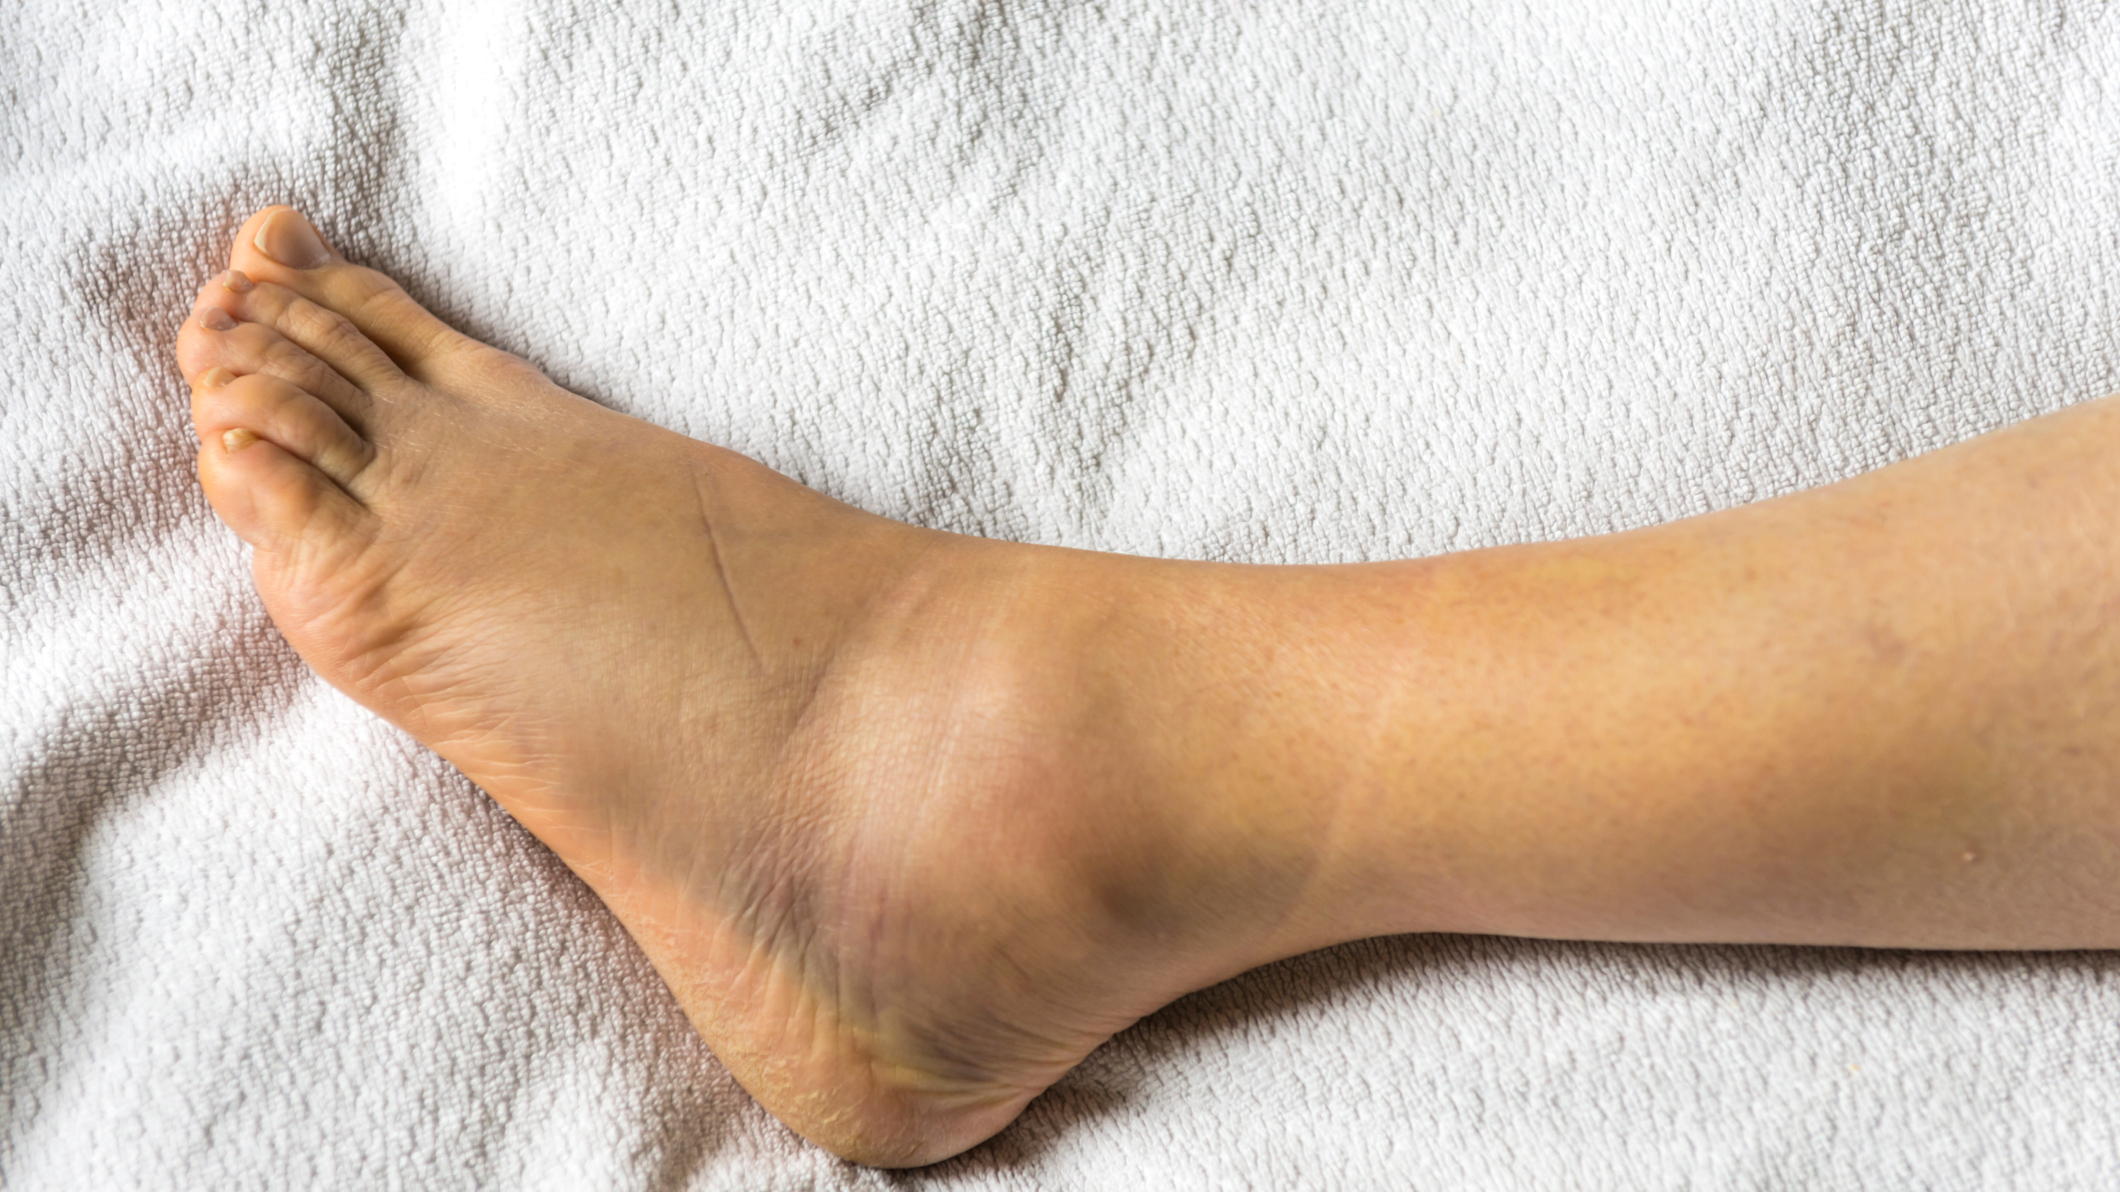 I Frequently Have Swollen Feet Causing Foot Pain: Should I Be Worried?